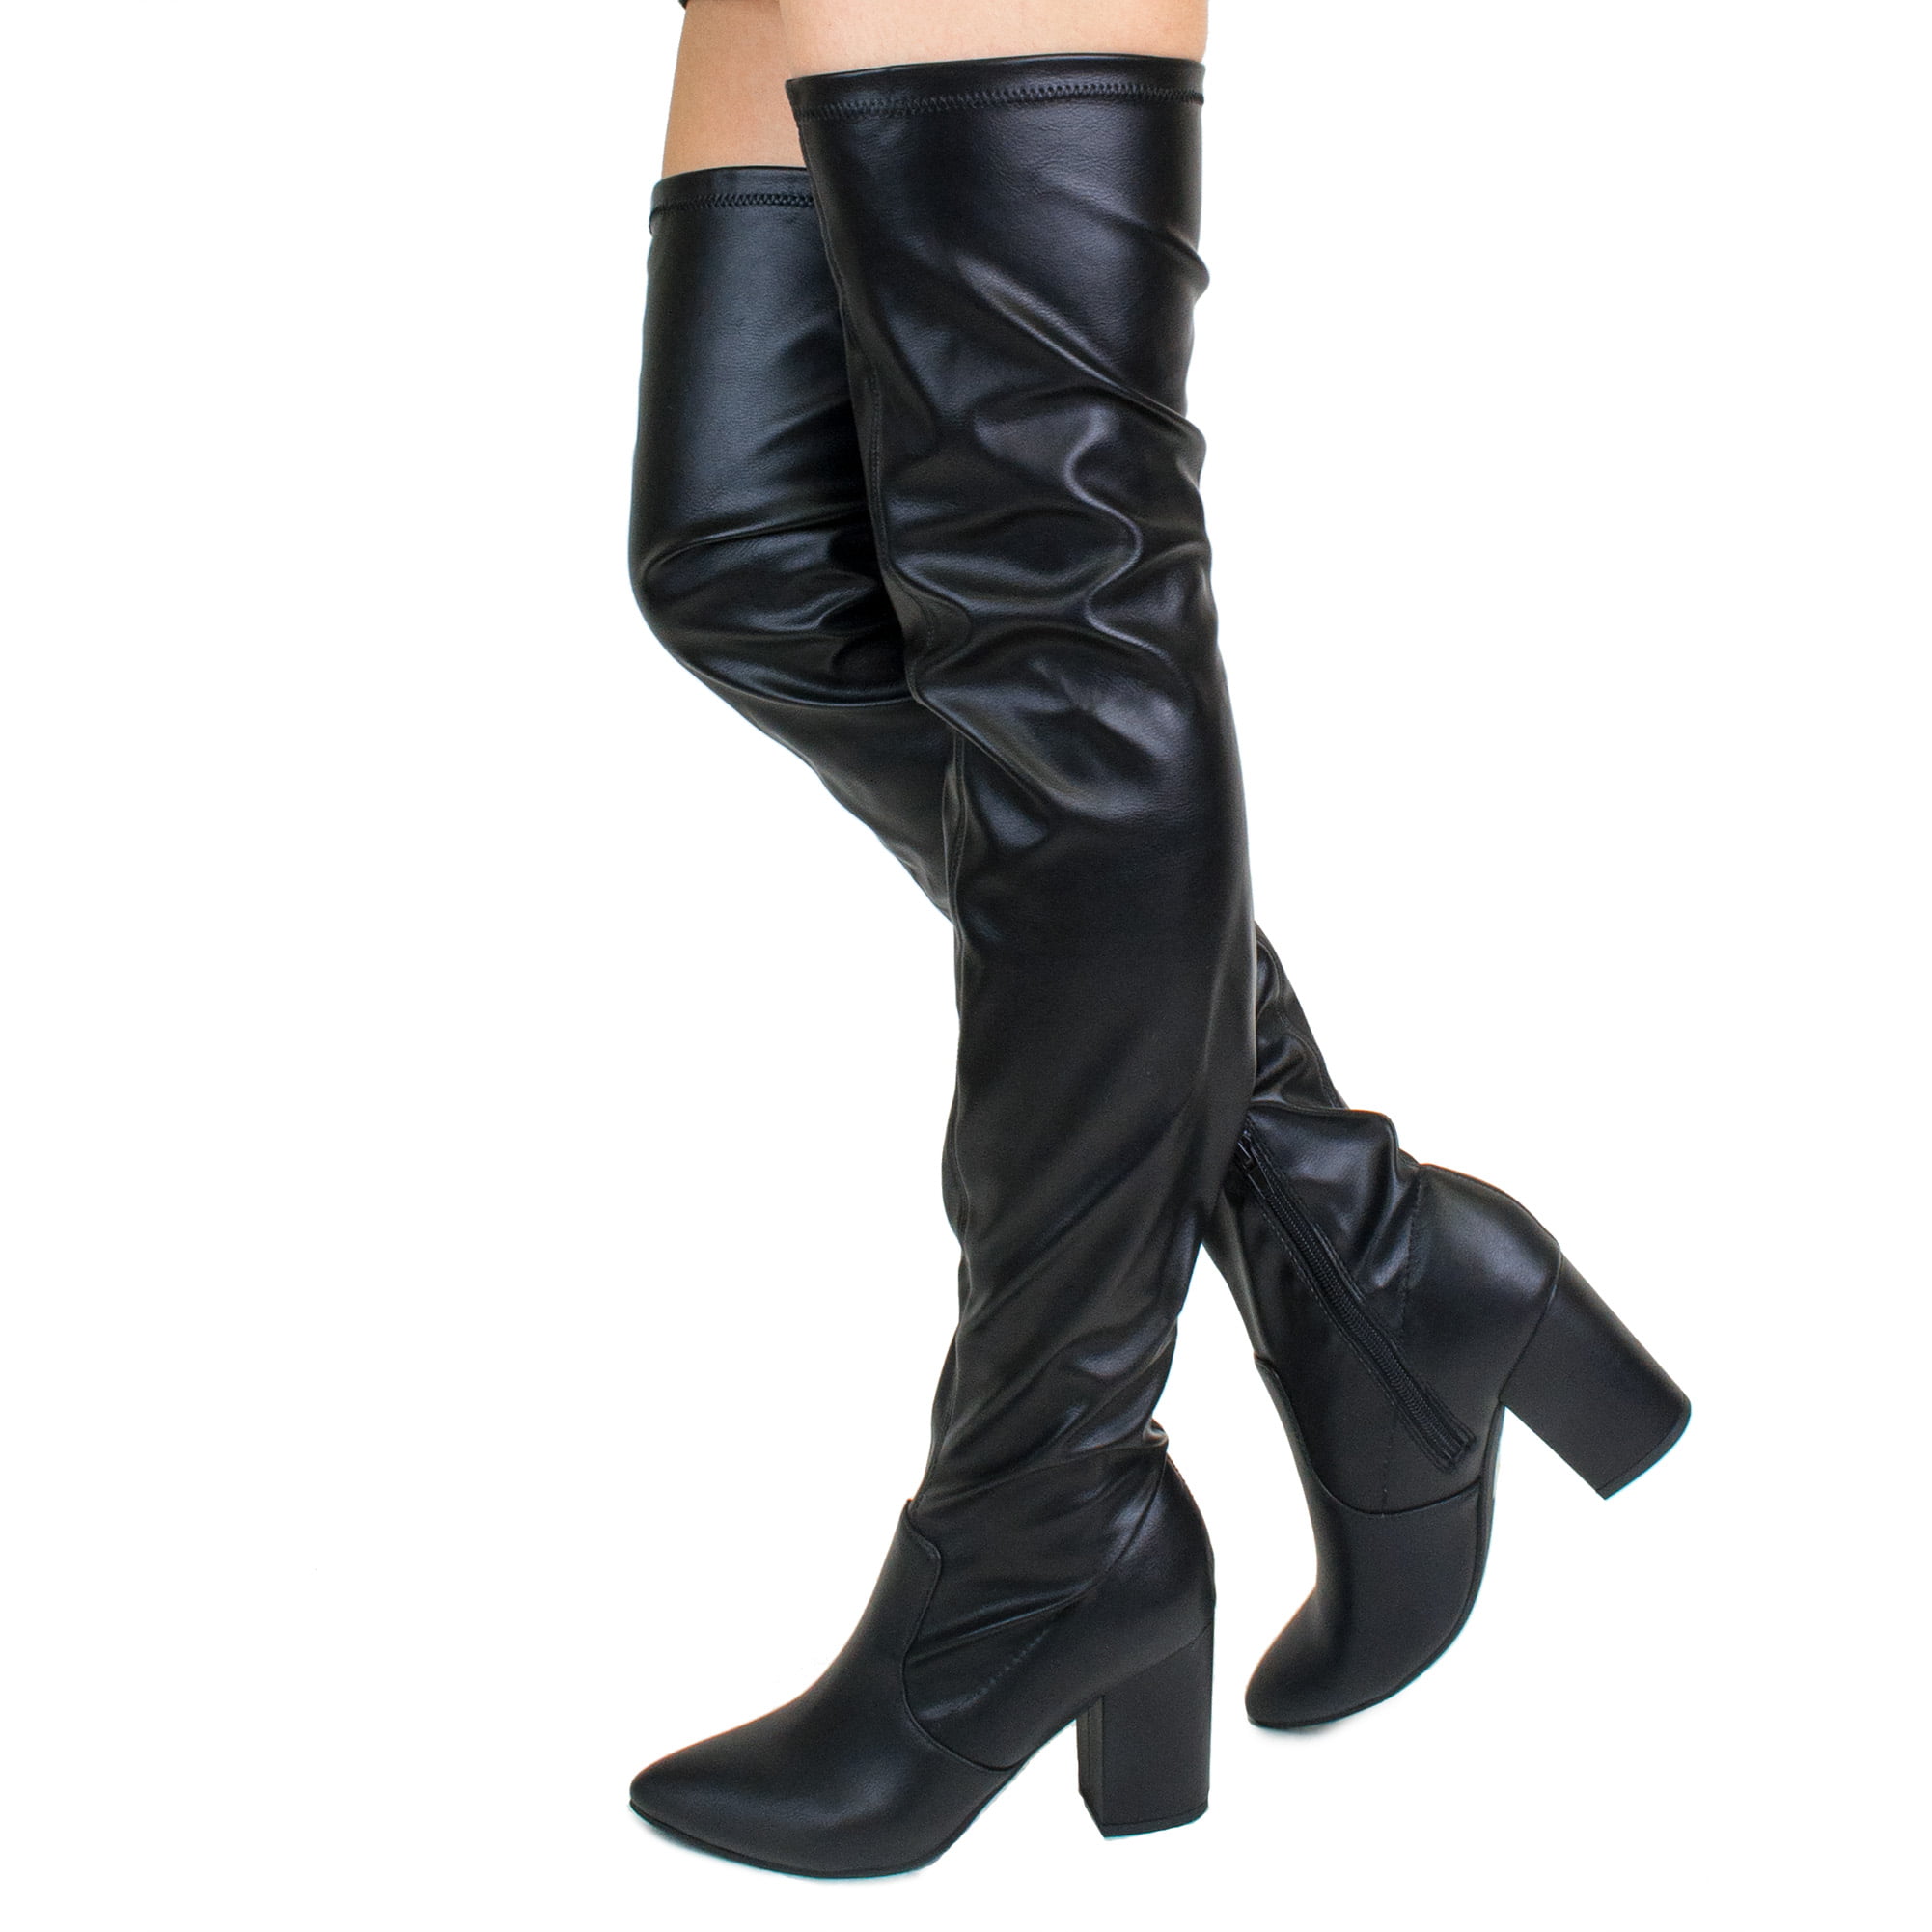 WOMENS LADIES LOW FLAT HEEL OVER THE KNEE THIGH HIGH STRETCH RIDING BOOTS SIZE 